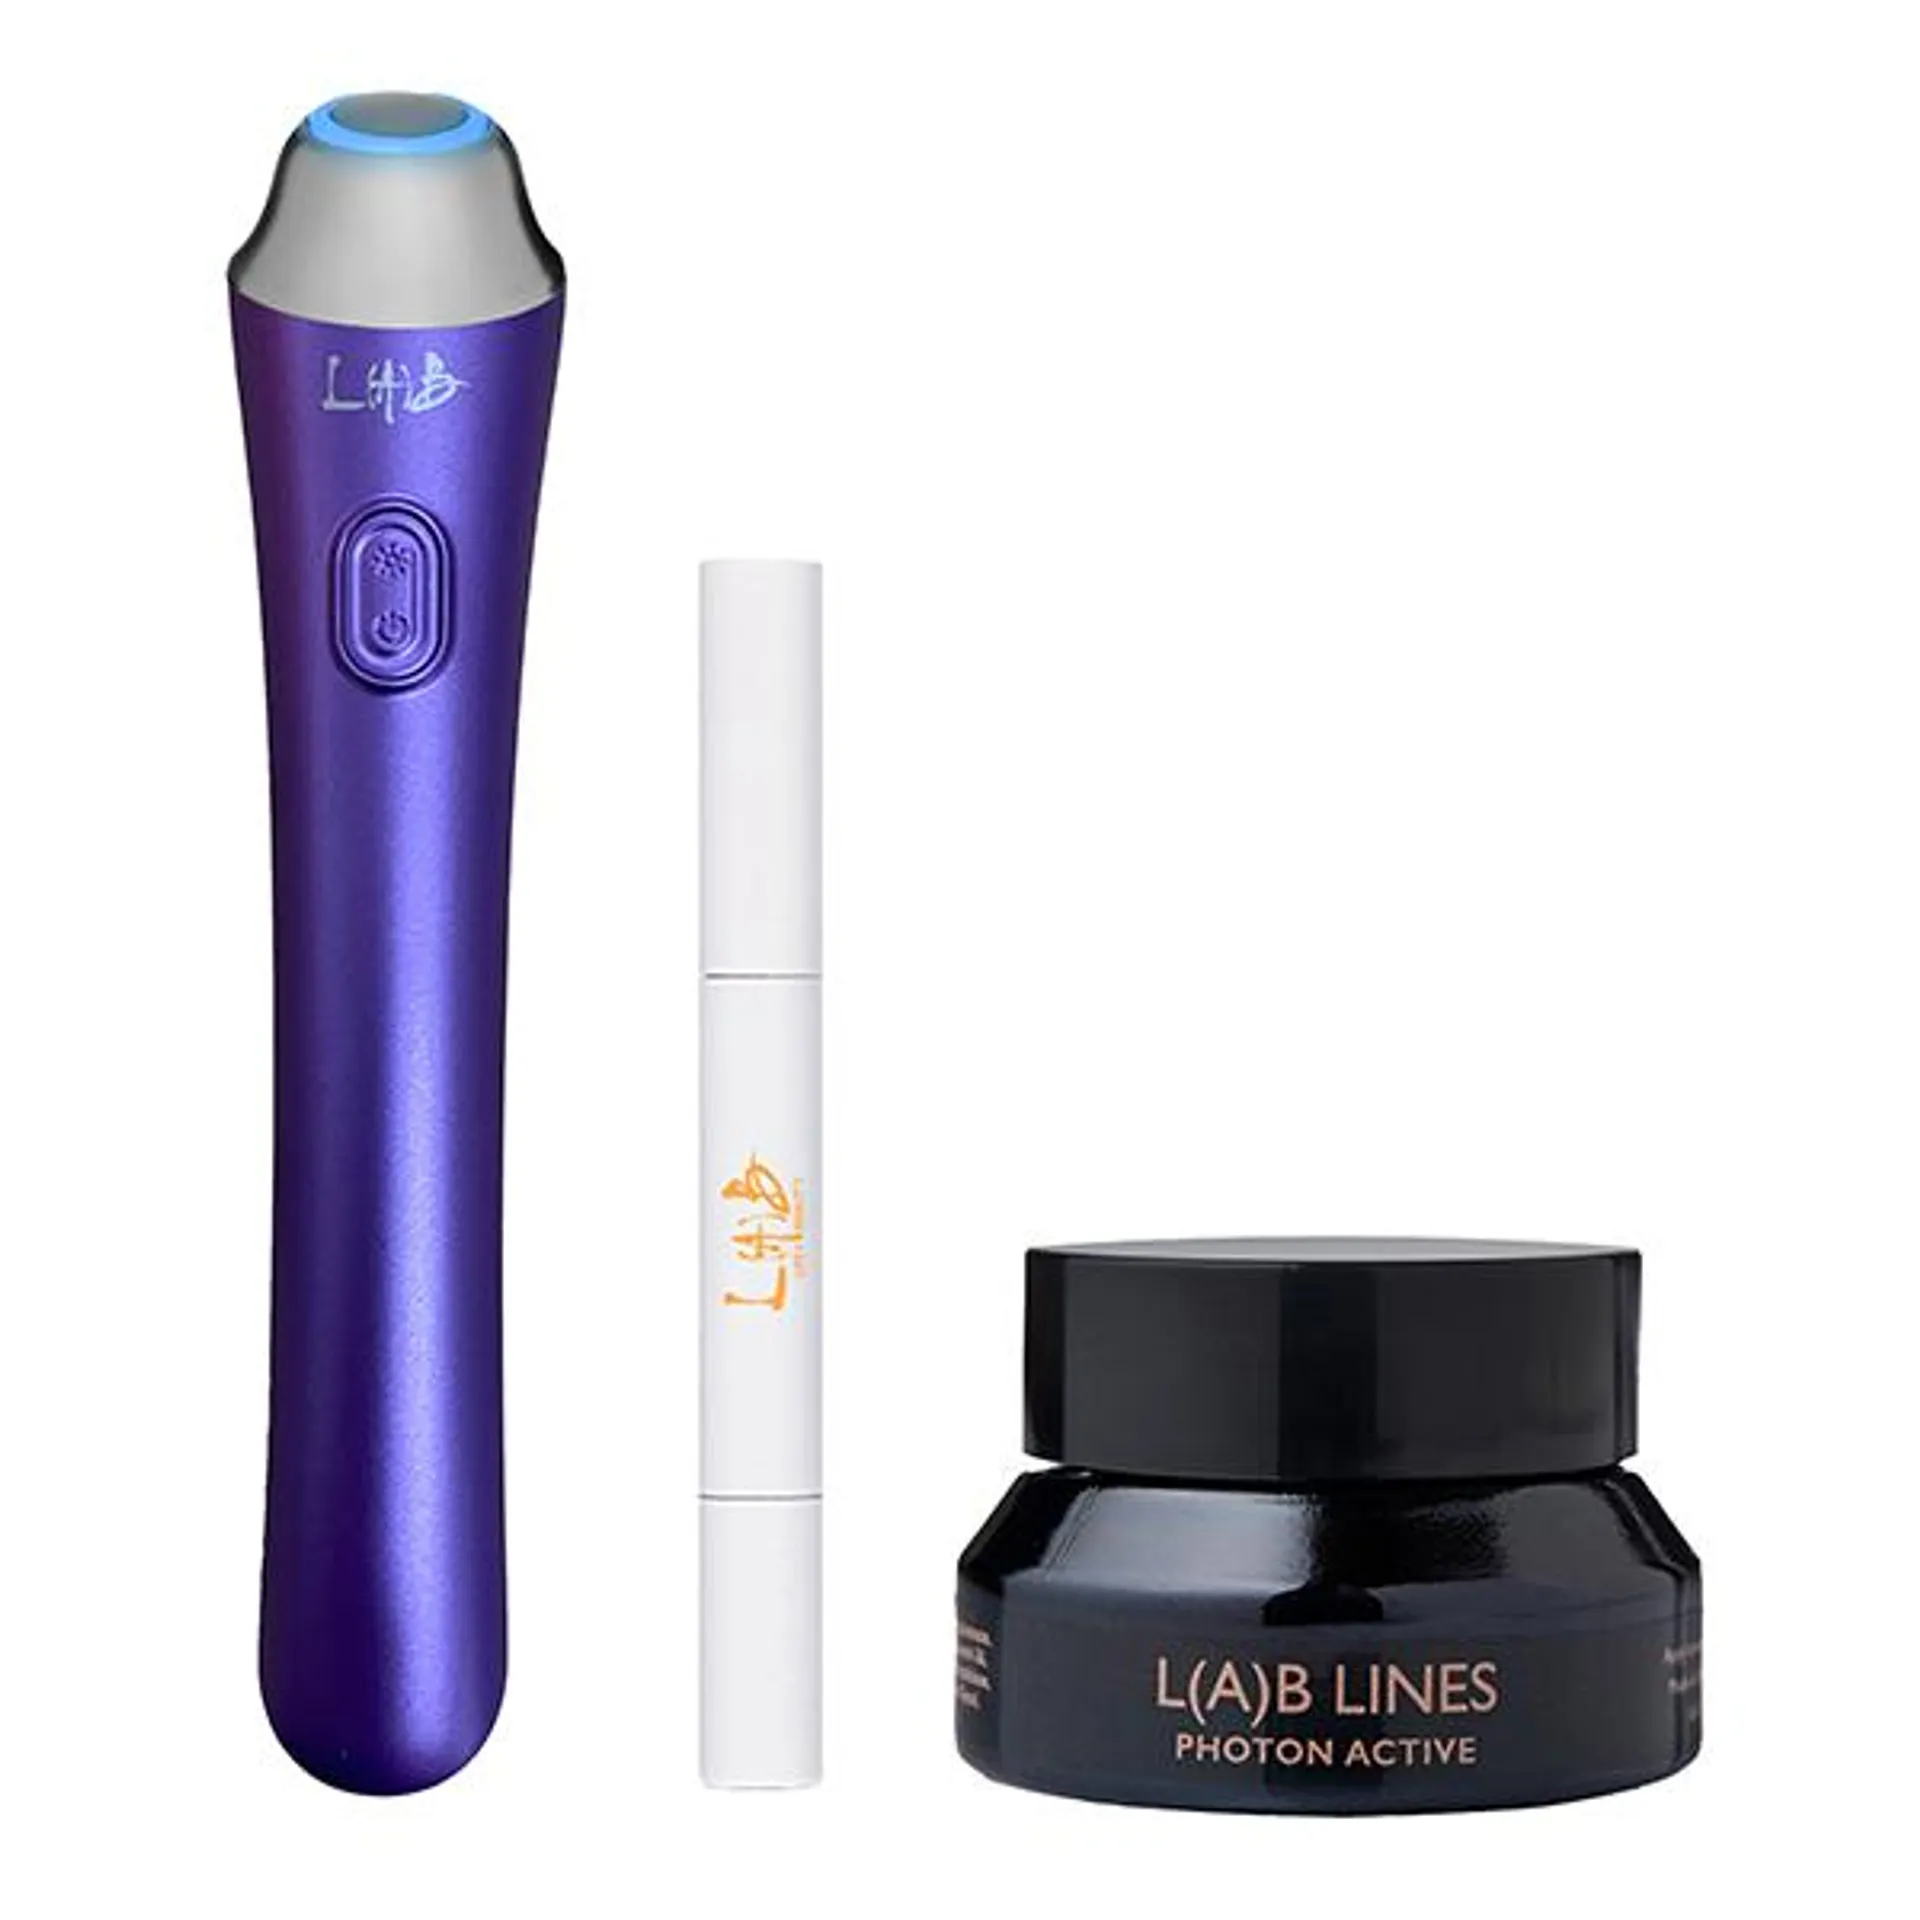 LAB Lip + Eye Photon Re- Charge (USB) 2.0 with Lab Lines and Teeth Whitening Pen